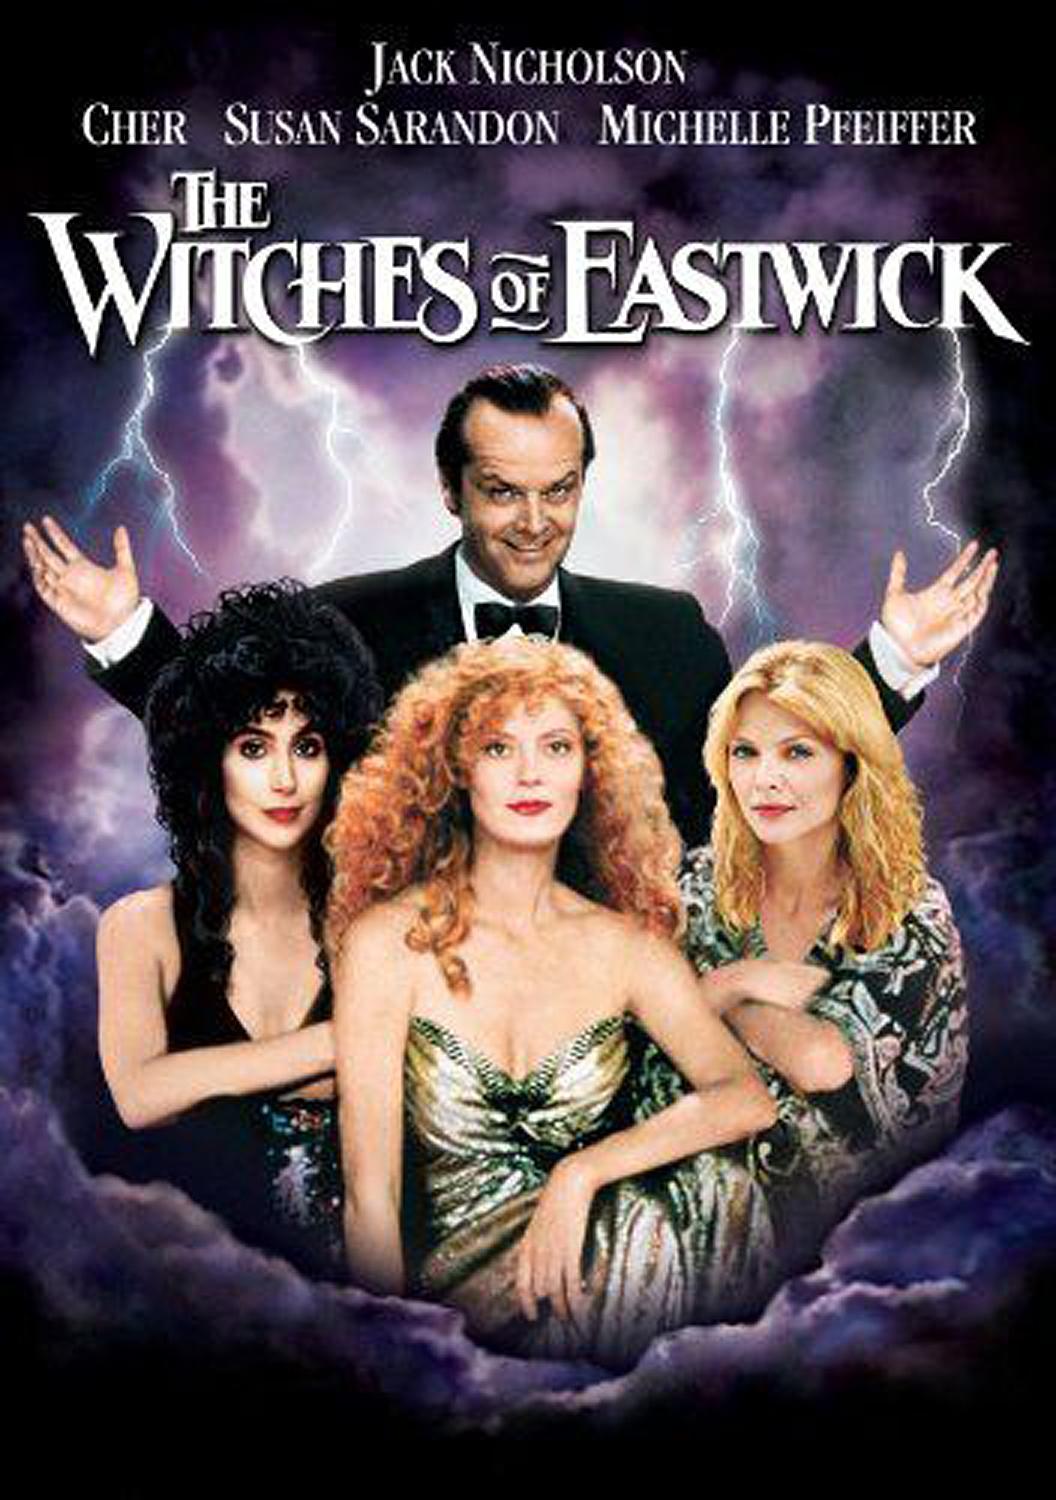 A breathtaking ensemble worn by Cher for her role in the 1987 Warner Brothers production of Witches of Eastwick. 
This famous film stars Jack Nicholson as Daryl Van Horne, alongside Cher, Michelle Pfeiffer and Susan Sarandon as the eponymous